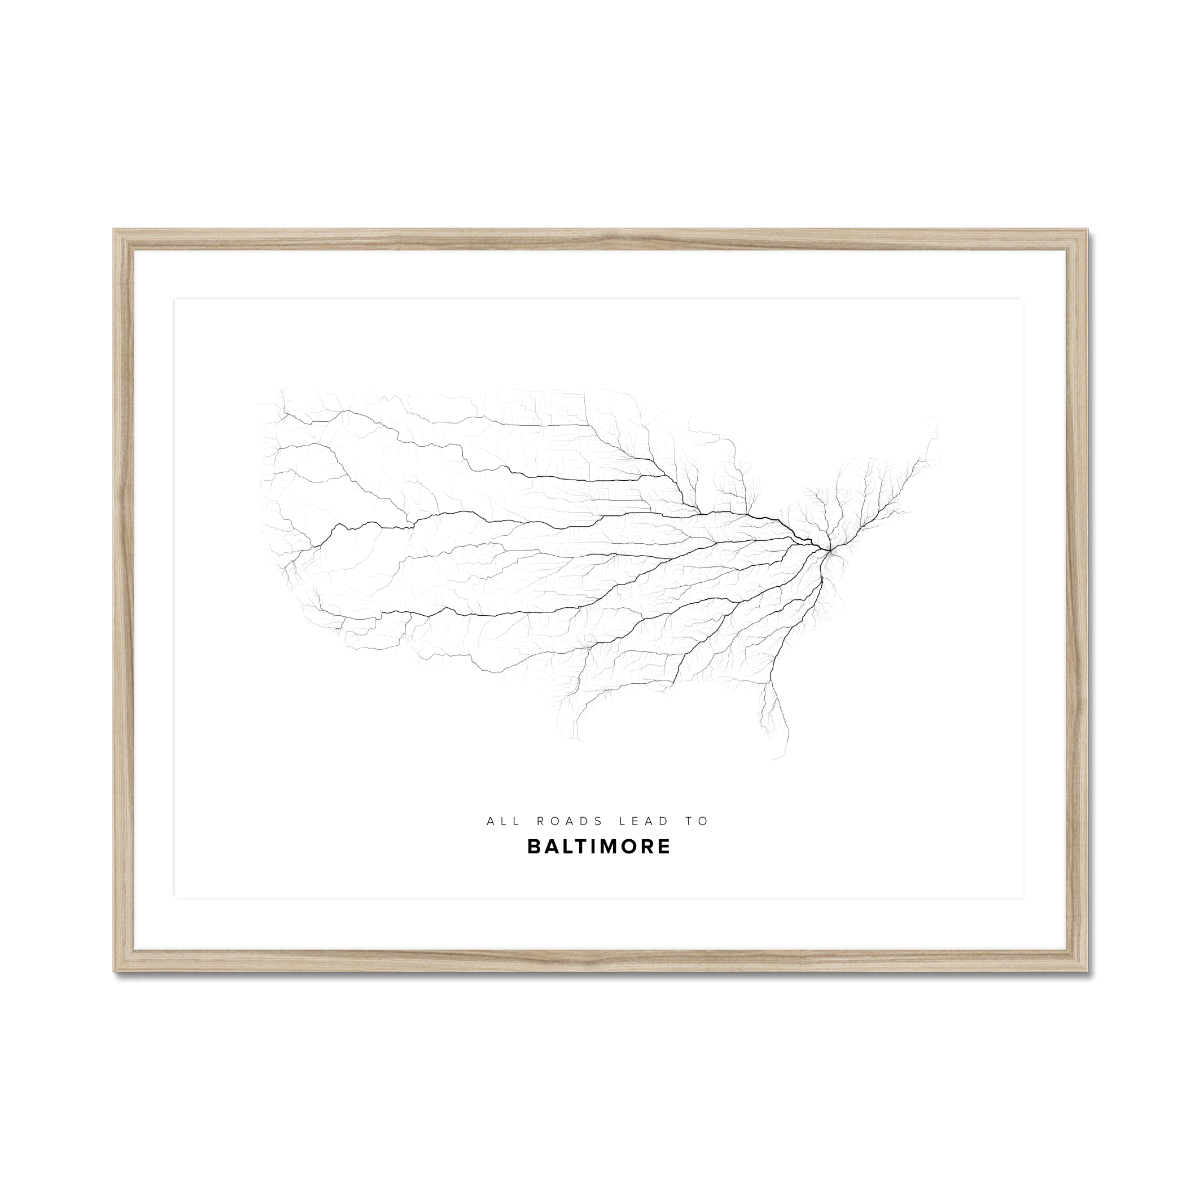 All roads lead to Baltimore (United States of America) Fine Art Map Print